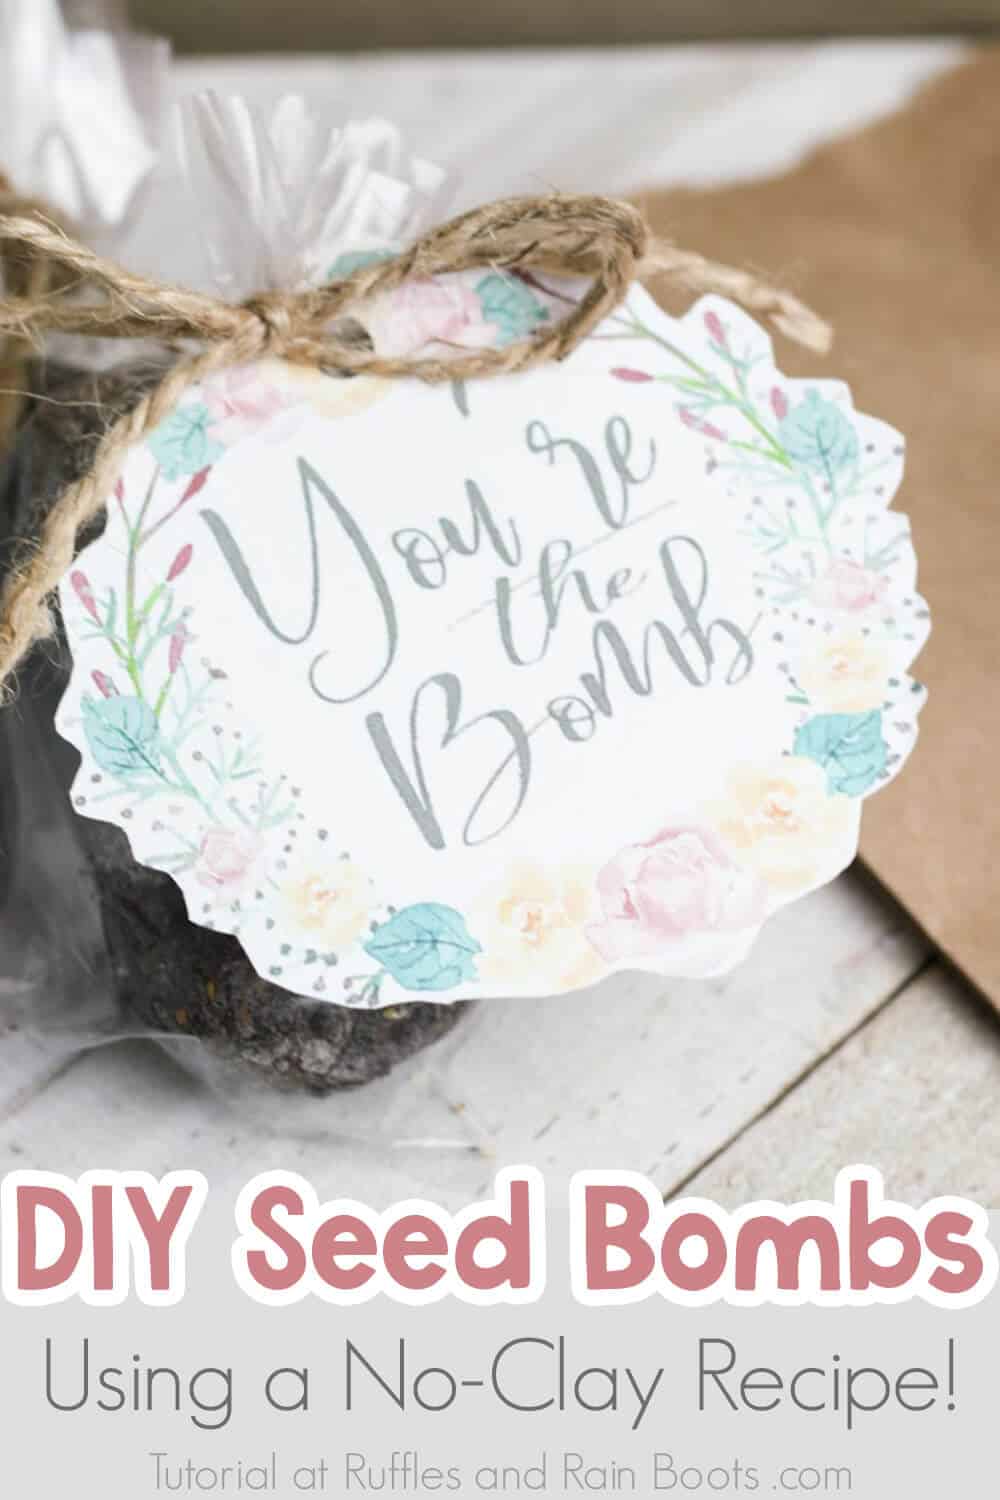 kid seed bomb recipe clay free with text which reads diy seed bombs using a no0clay recipe!